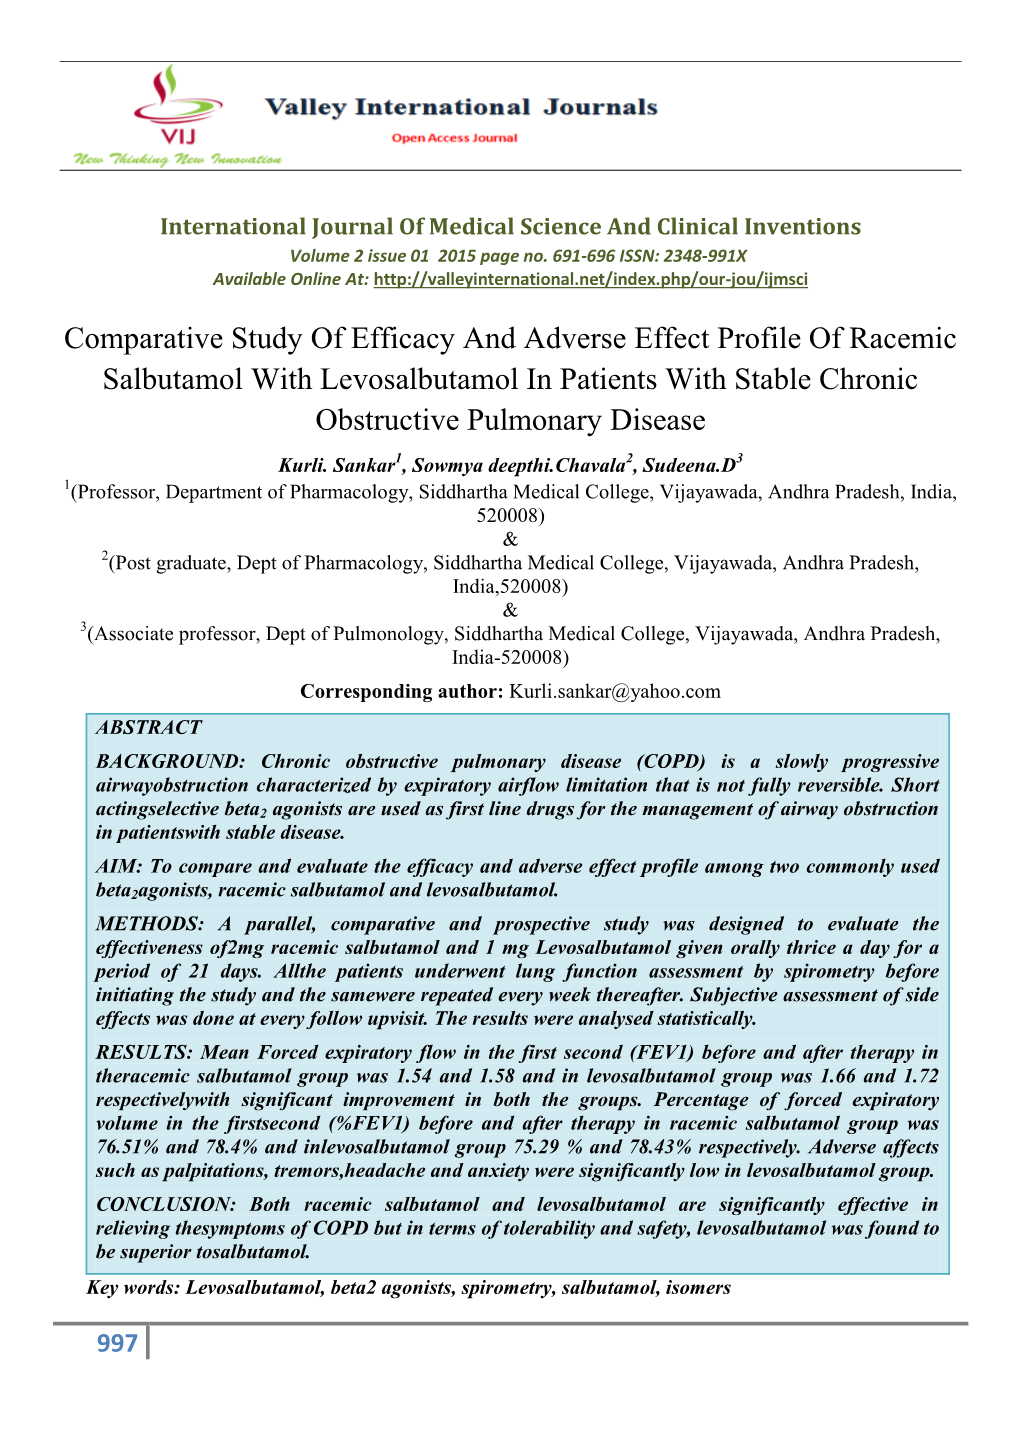 Comparative Study of Efficacy and Adverse Effect Profile of Racemic Salbutamol with Levosalbutamol in Patients with Stable Chronic Obstructive Pulmonary Disease Kurli